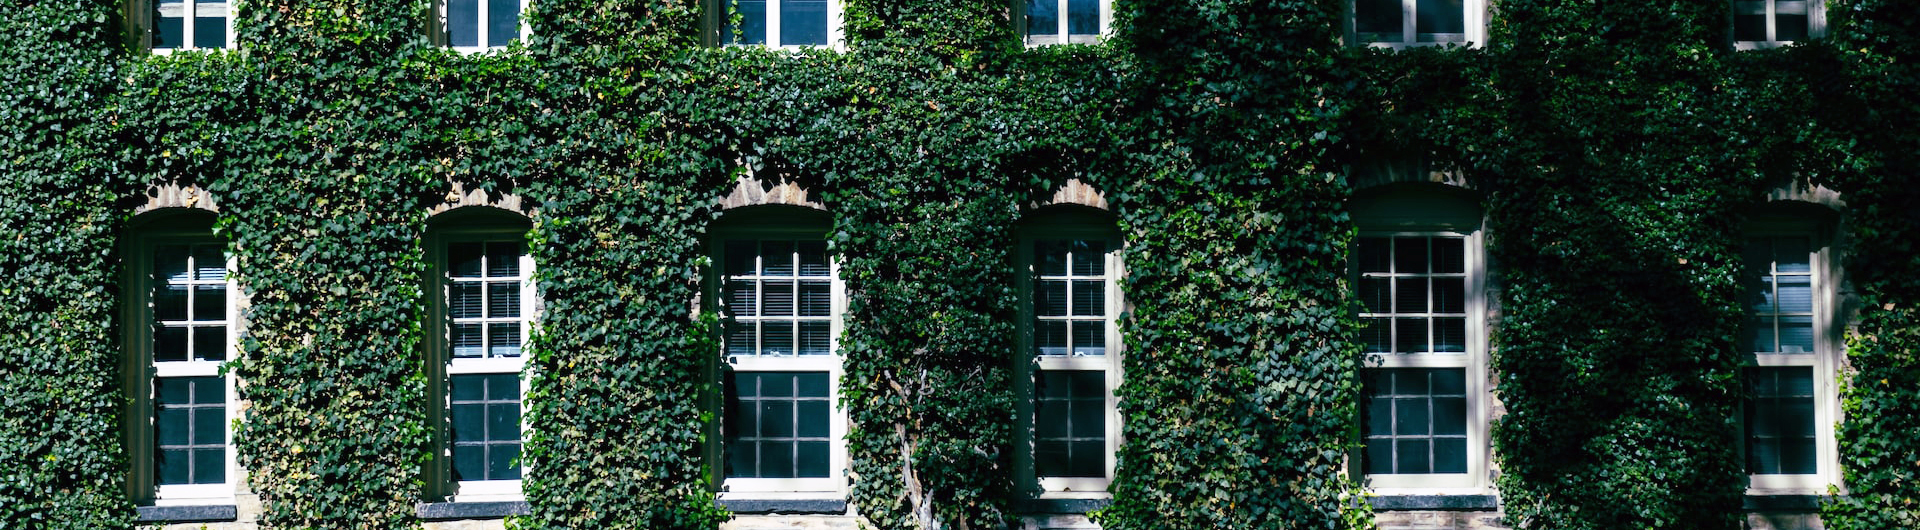 ivy covered hall of a higher education university